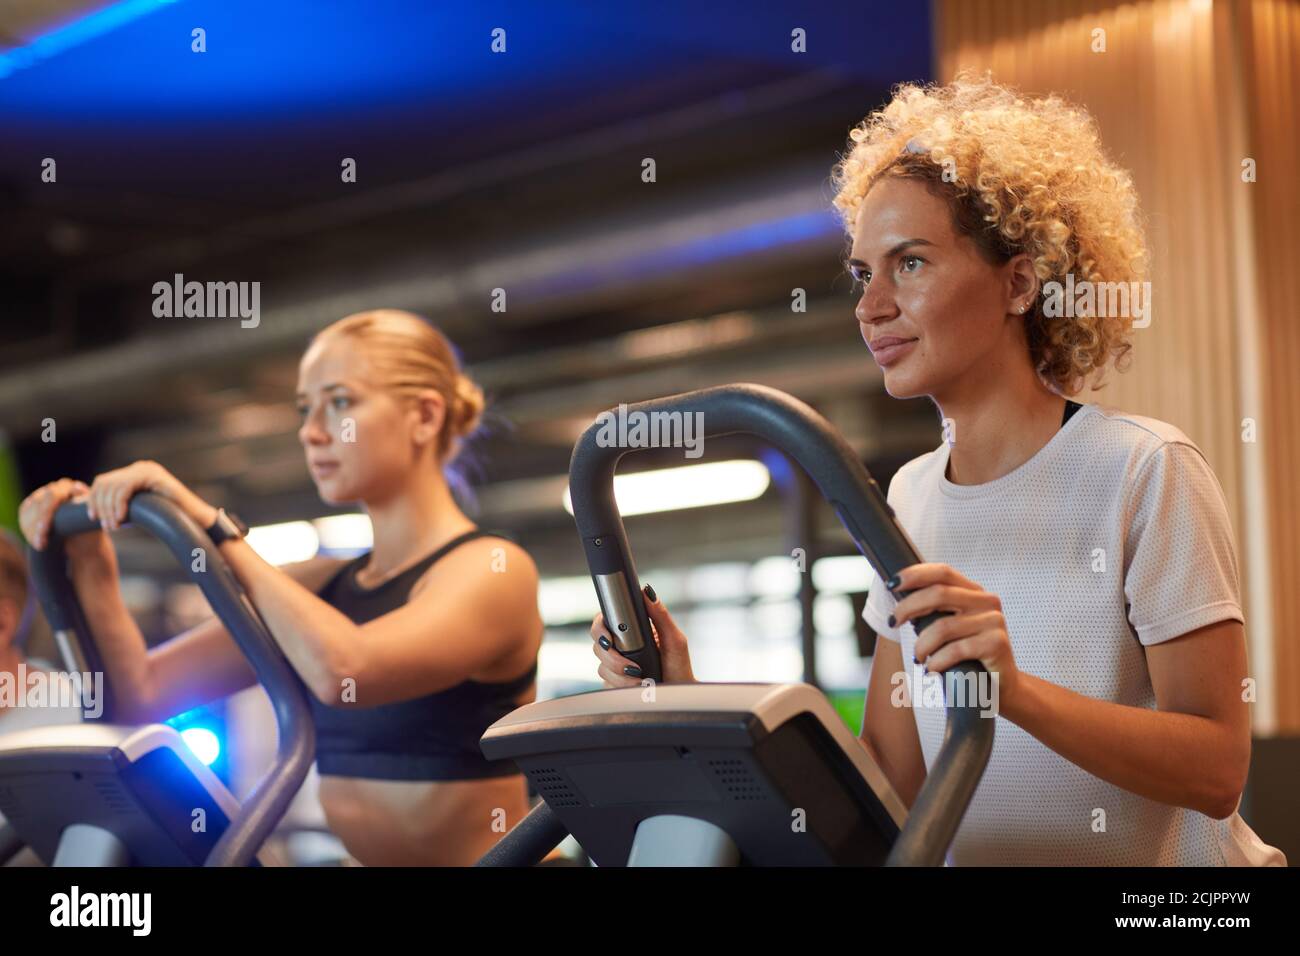 Two young women training on treadmills in modern gym Stock Photo - Alamy